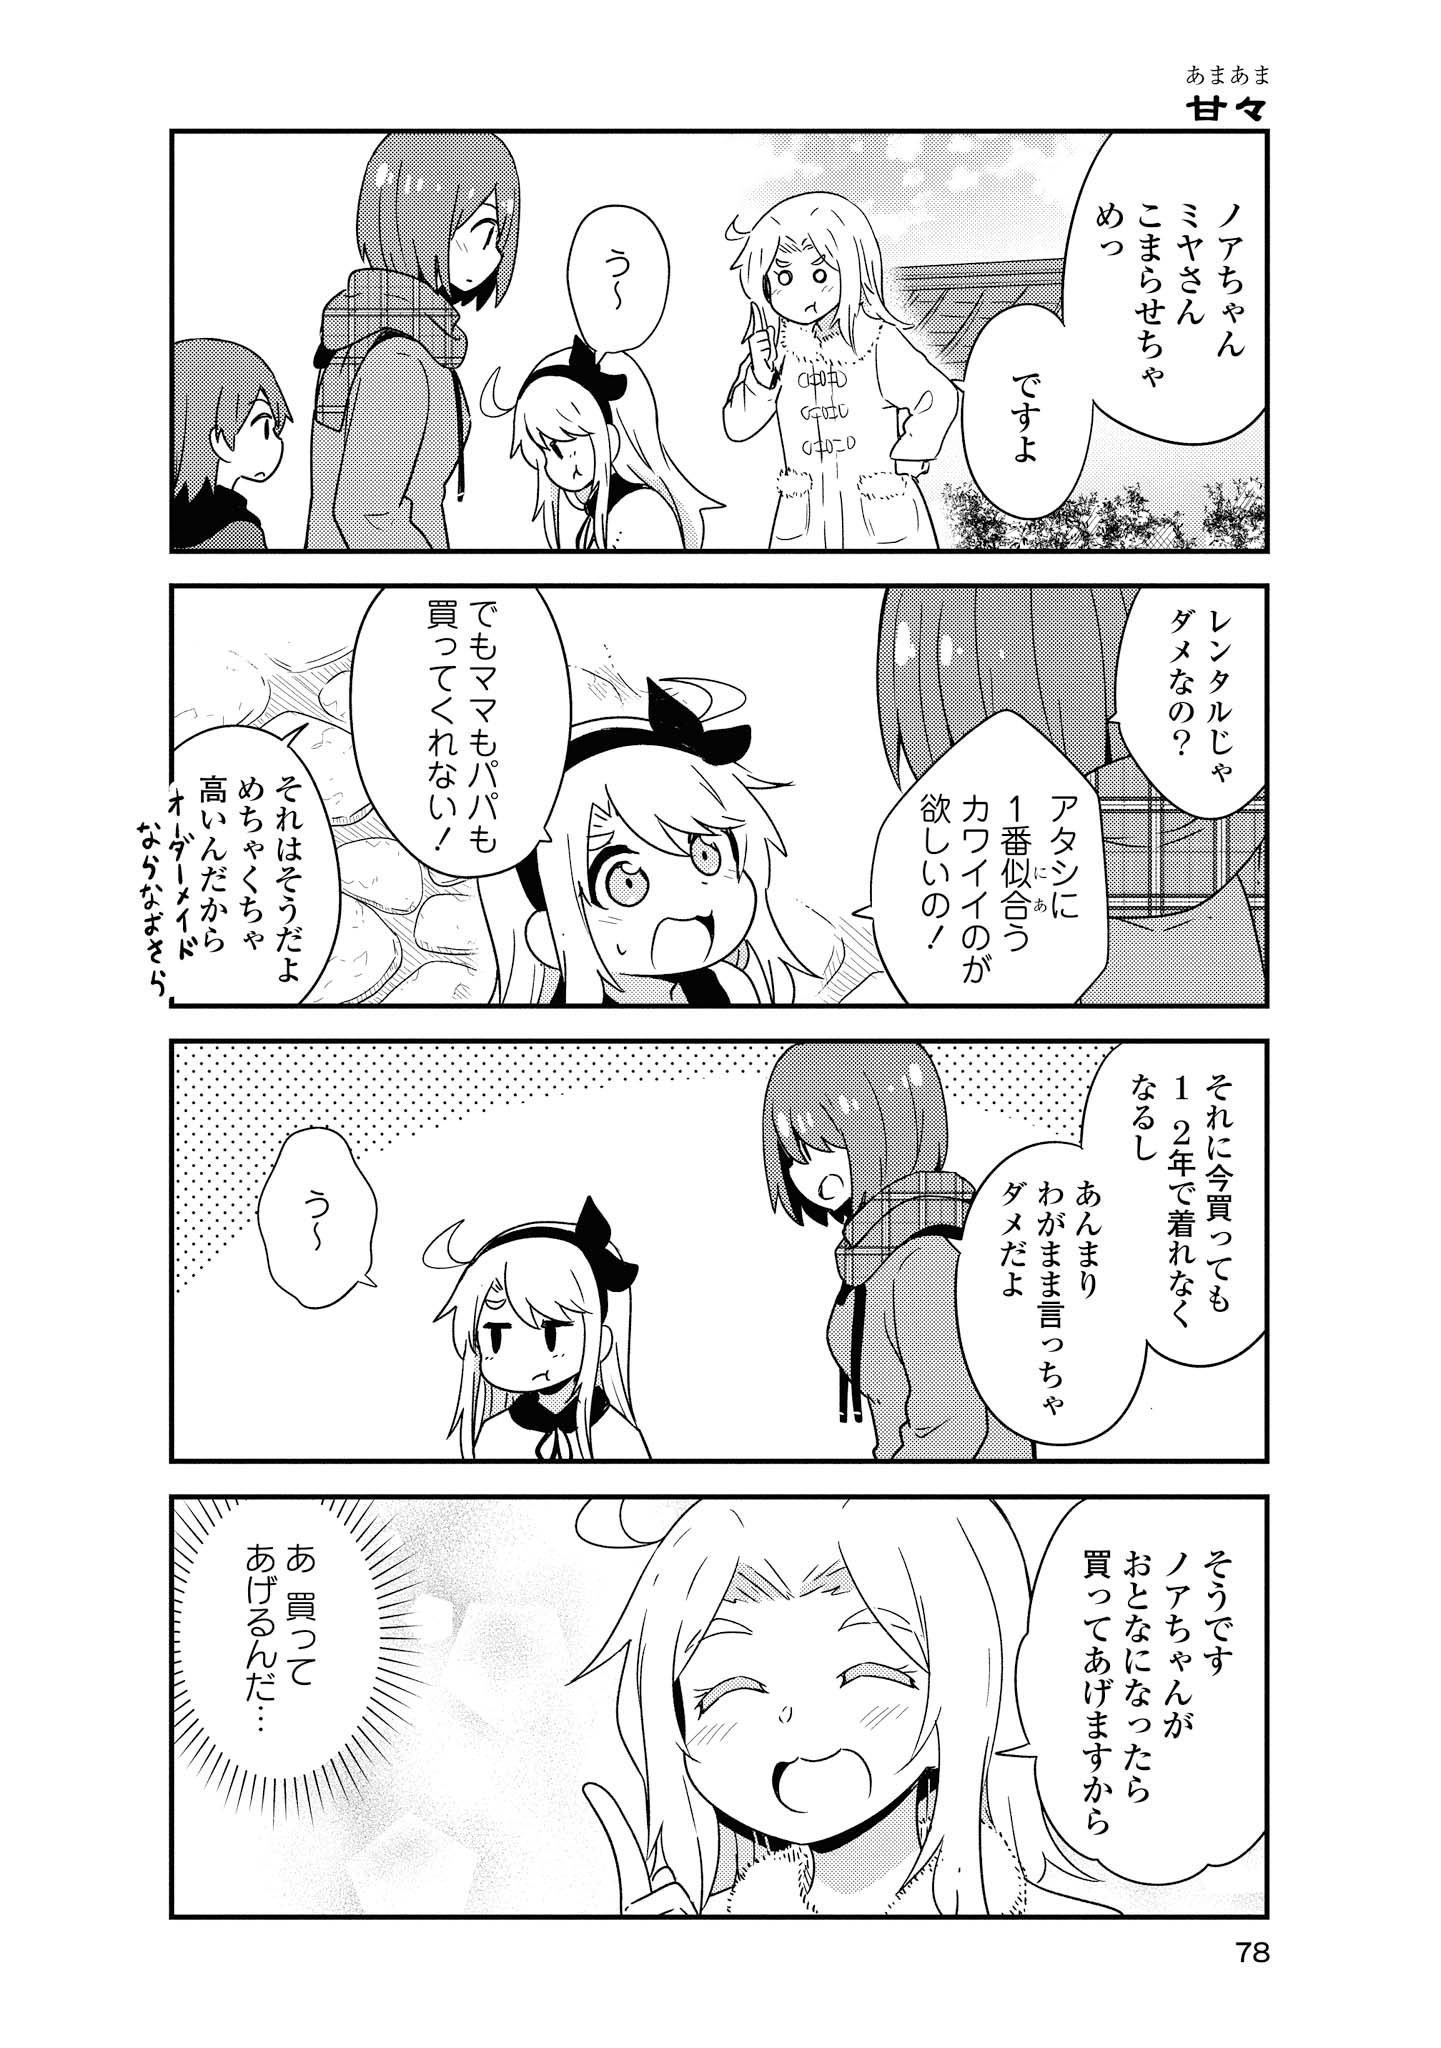 Wataten! An Angel Flew Down to Me 私に天使が舞い降りた！ 第48話 - Page 8